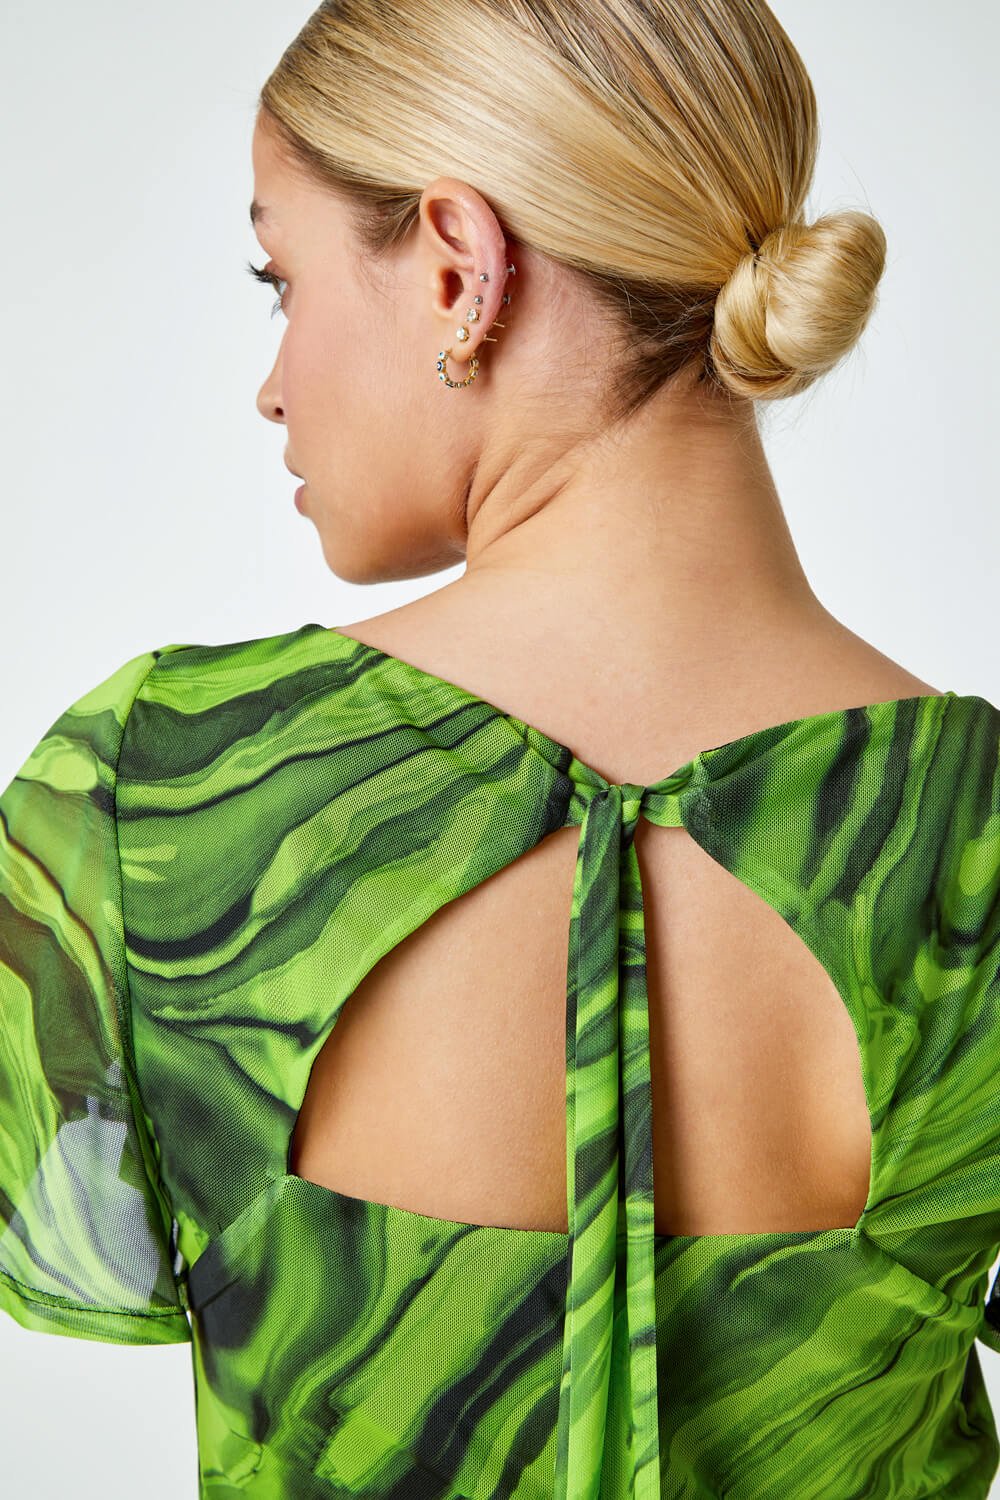 Green Swirl Print Stretch Cut Out Top, Image 5 of 5